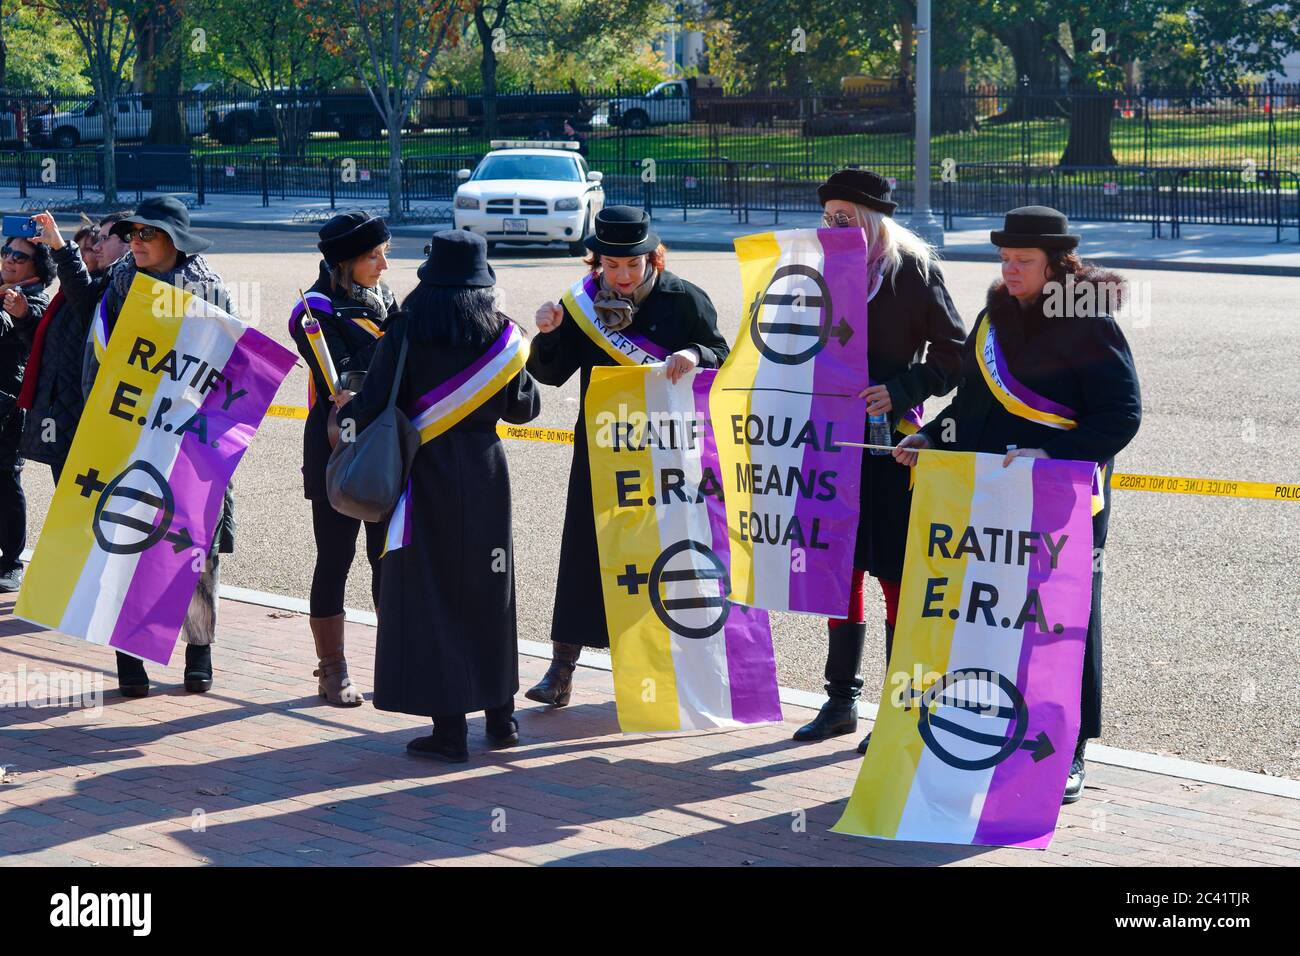 Activists requesting ratification of the Equal Rights Amendment (ERA) in front of the White House, Washington, D.C. Stock Photo